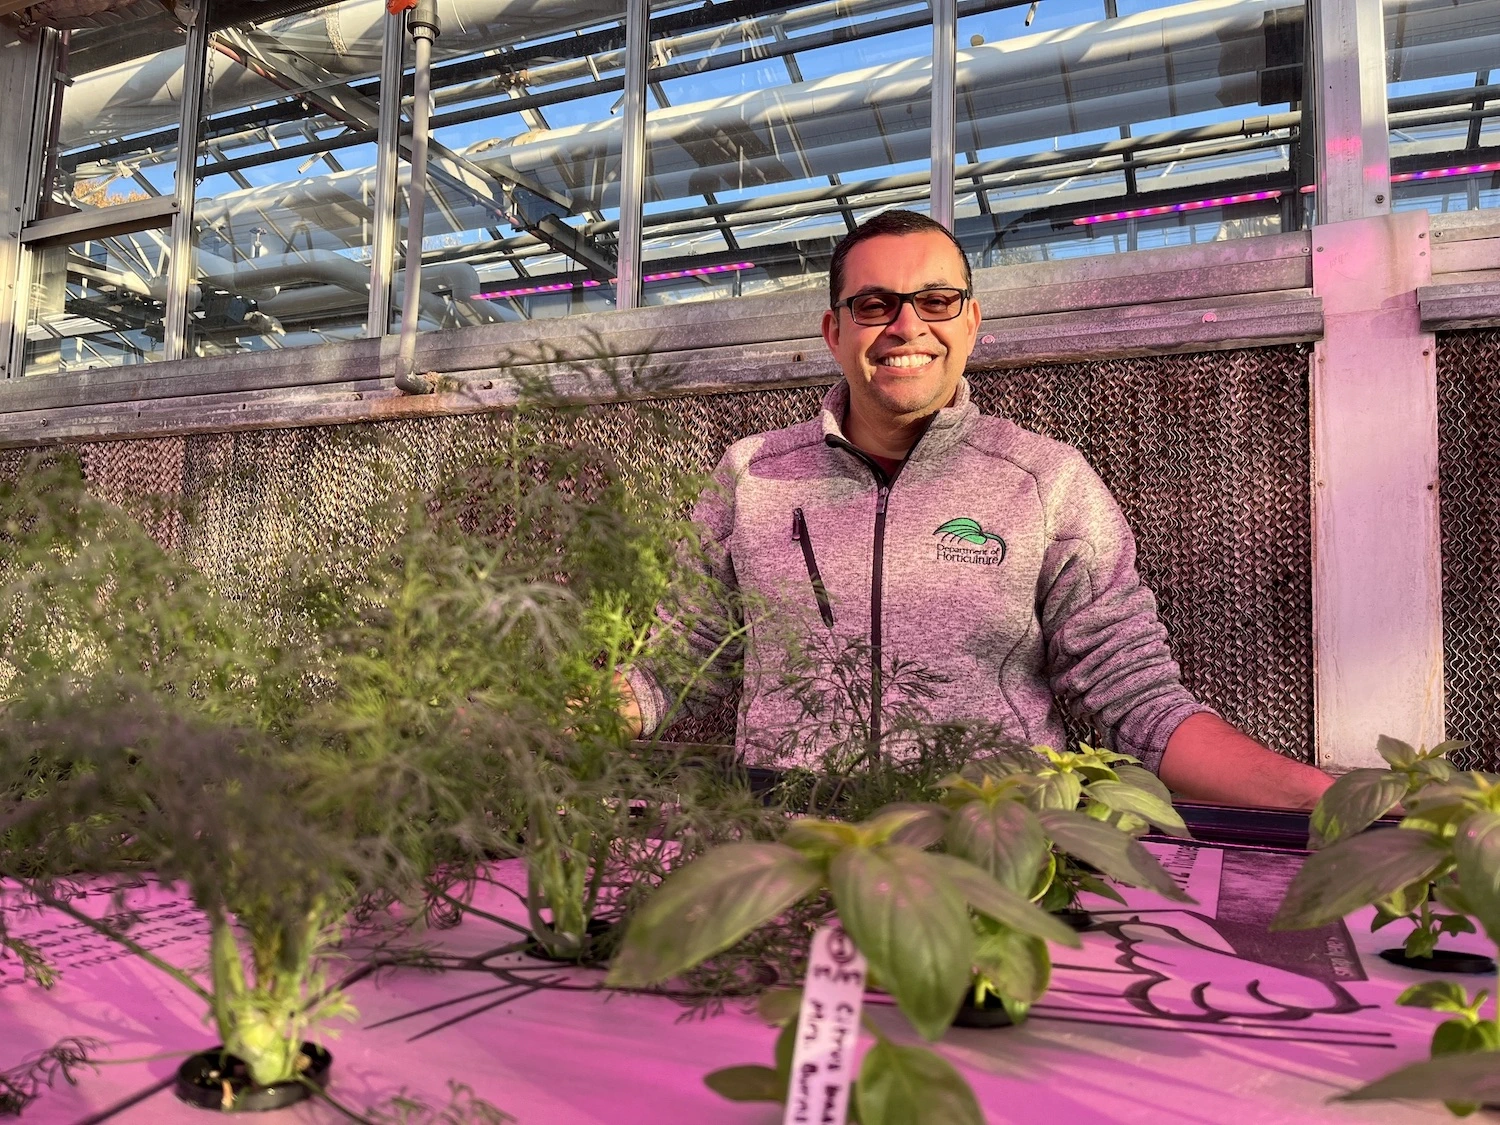 Roberto Lopez, an associate professor in the MSU Department of Horticulture, leads a new $3.4 million USDA-funded research project. Photo courtesy of Roberto Lopez.